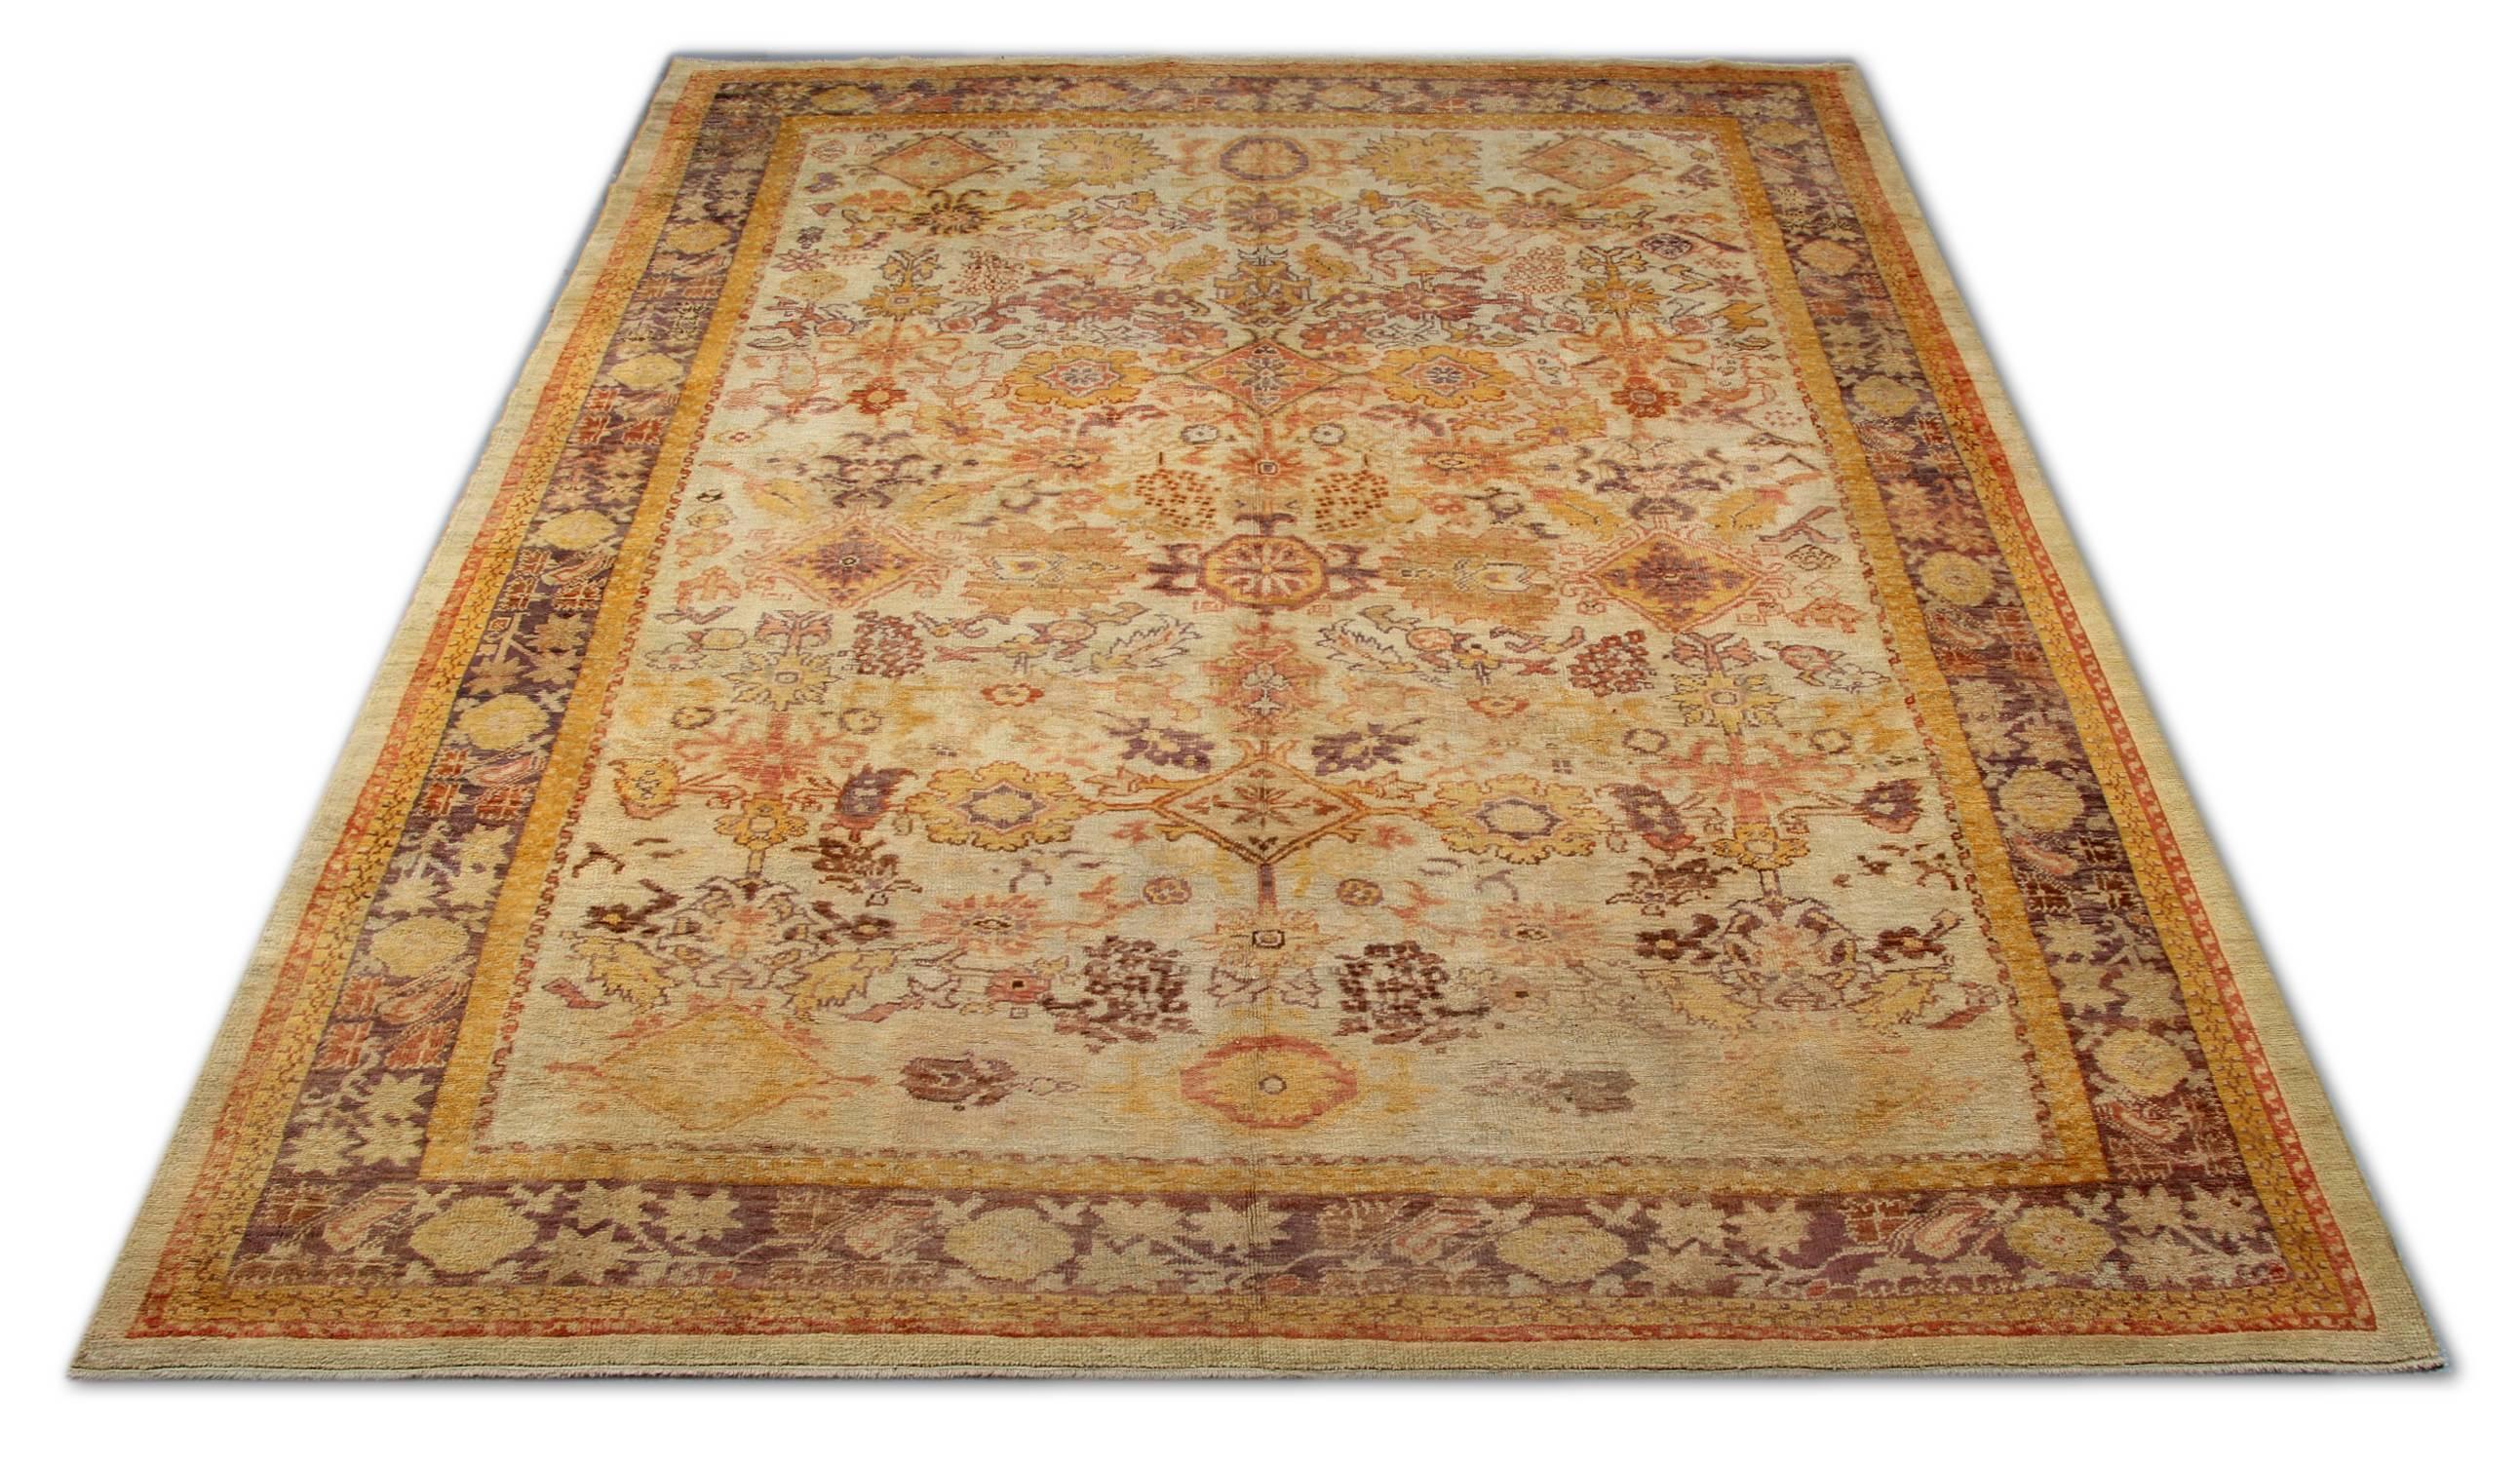 This antique rug is an oriental rug with a yellow background and is a kind of beautiful hand knotted Turkish carpets or Anatolian rugs with geometric rug pattern and very elegant tribal and floral rug design. These wool rugs have vibrant natural